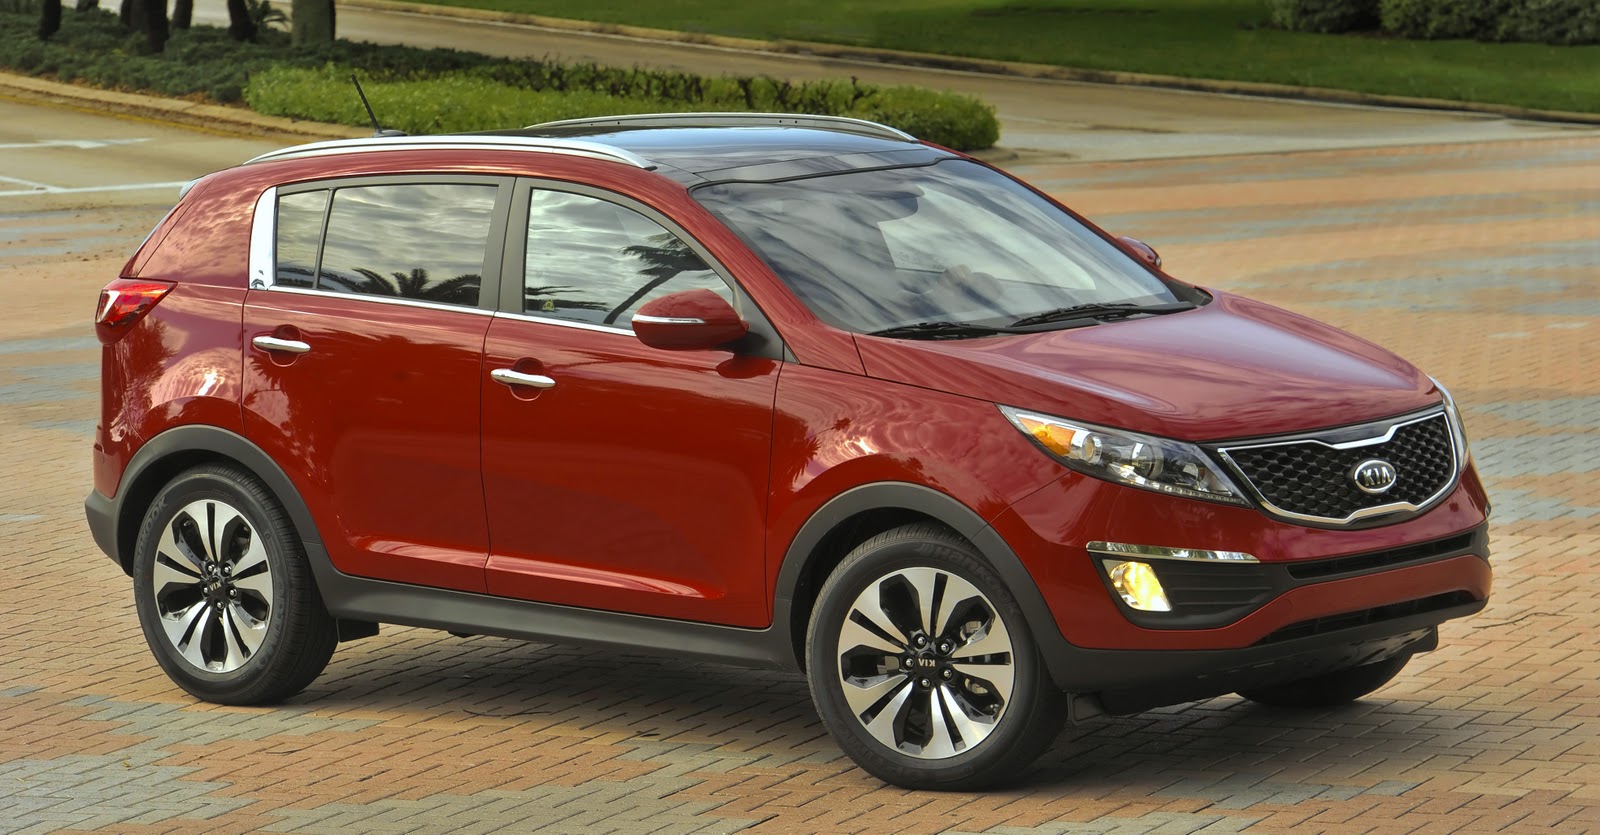 100+ [ Kia Sportage Brief About Model ] | Summer Is For ...